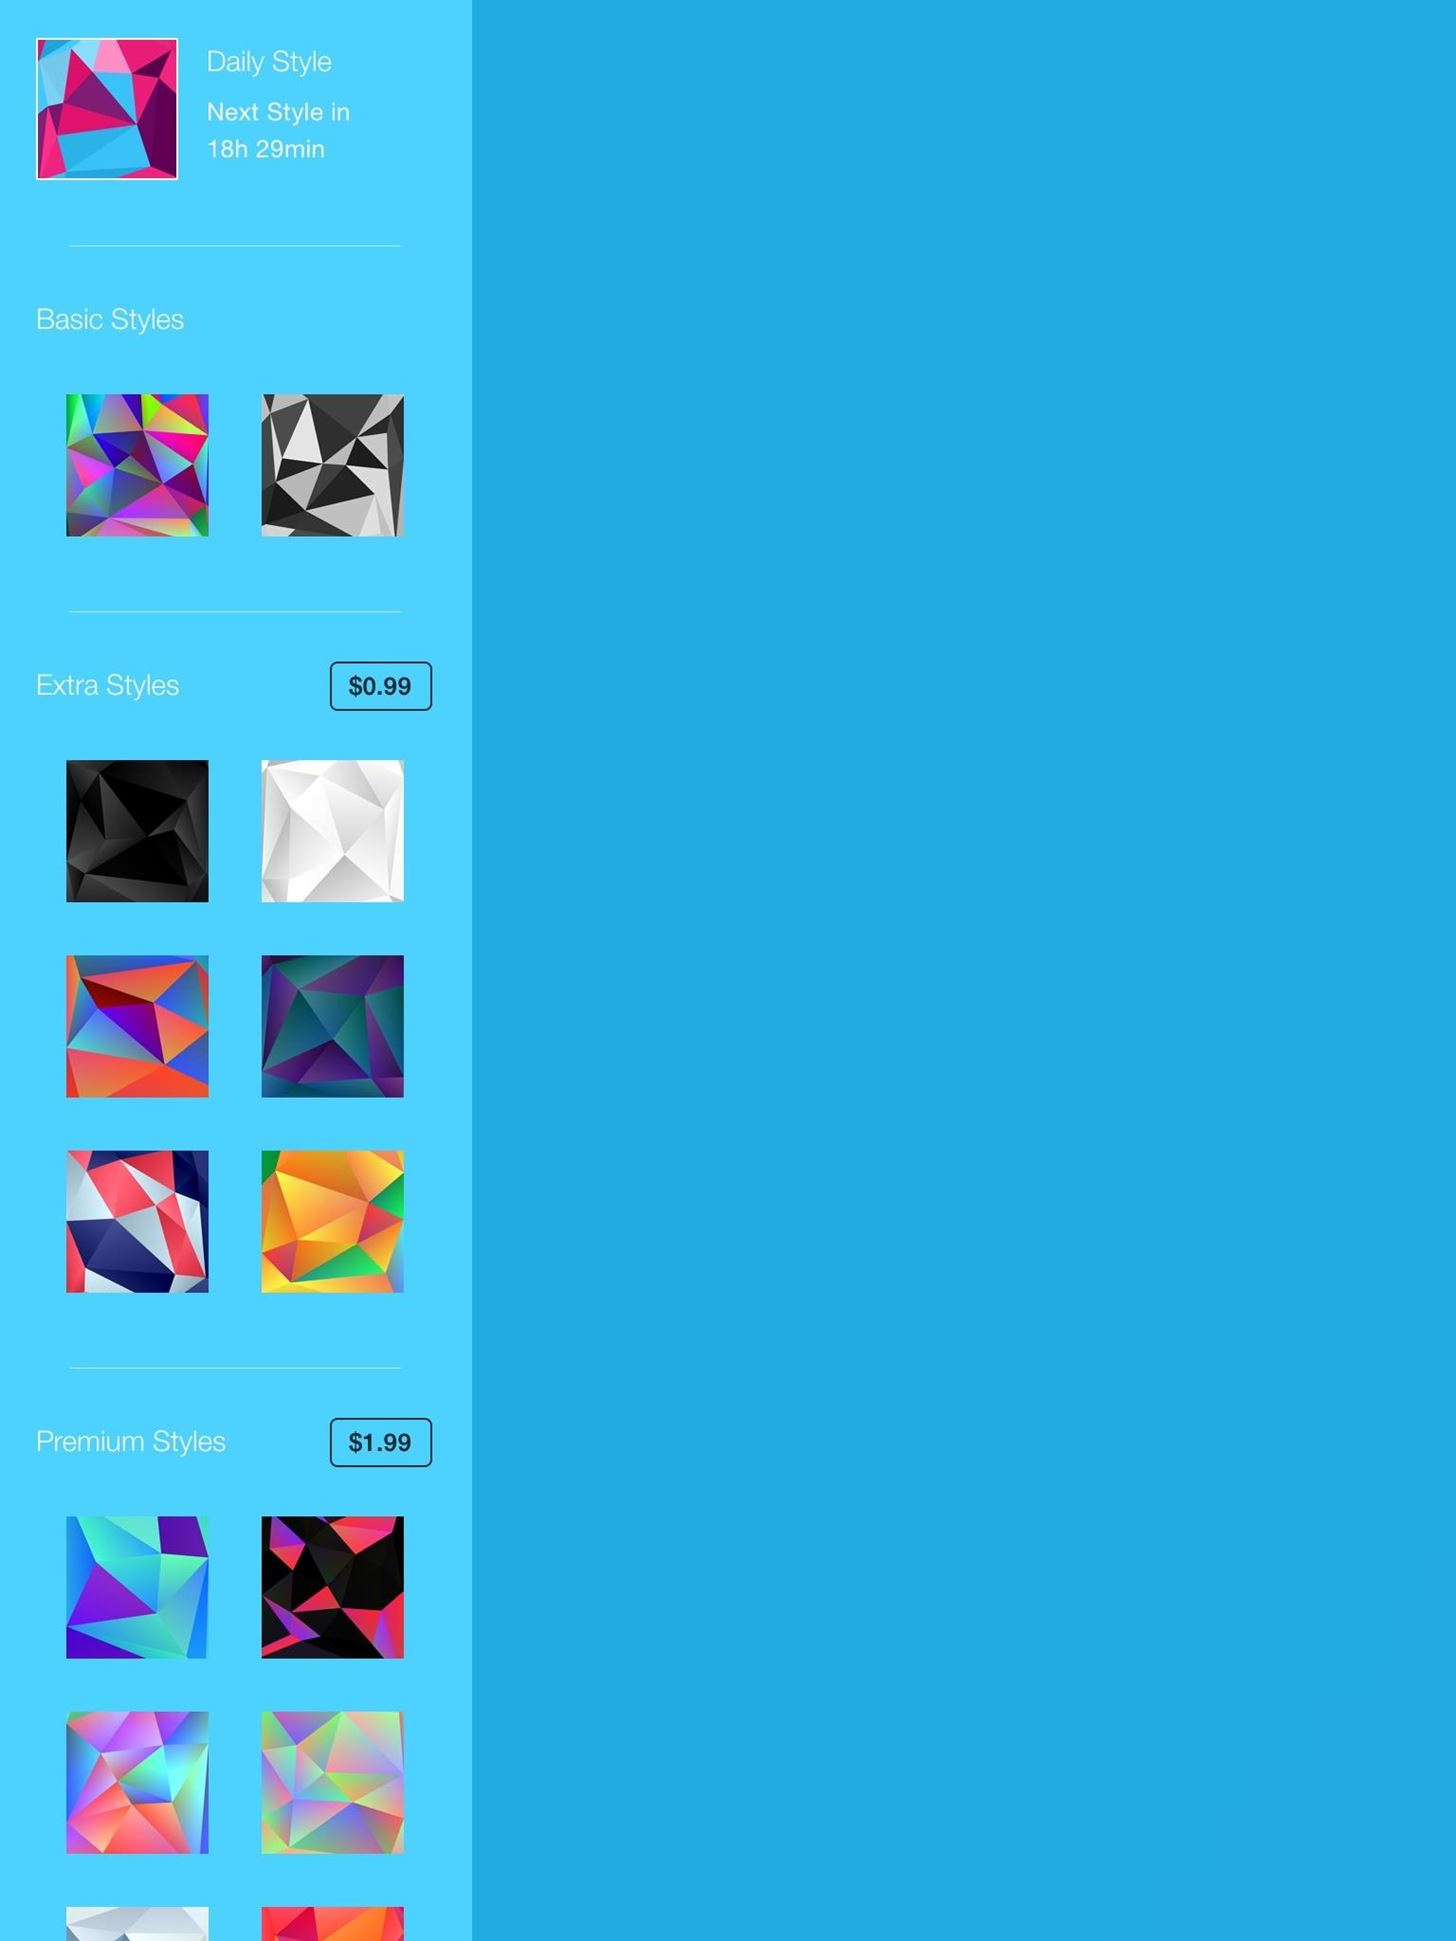 How to Create Your Own Abstract, Polygon-Shaped Wallpapers for Your iPad or iPhone